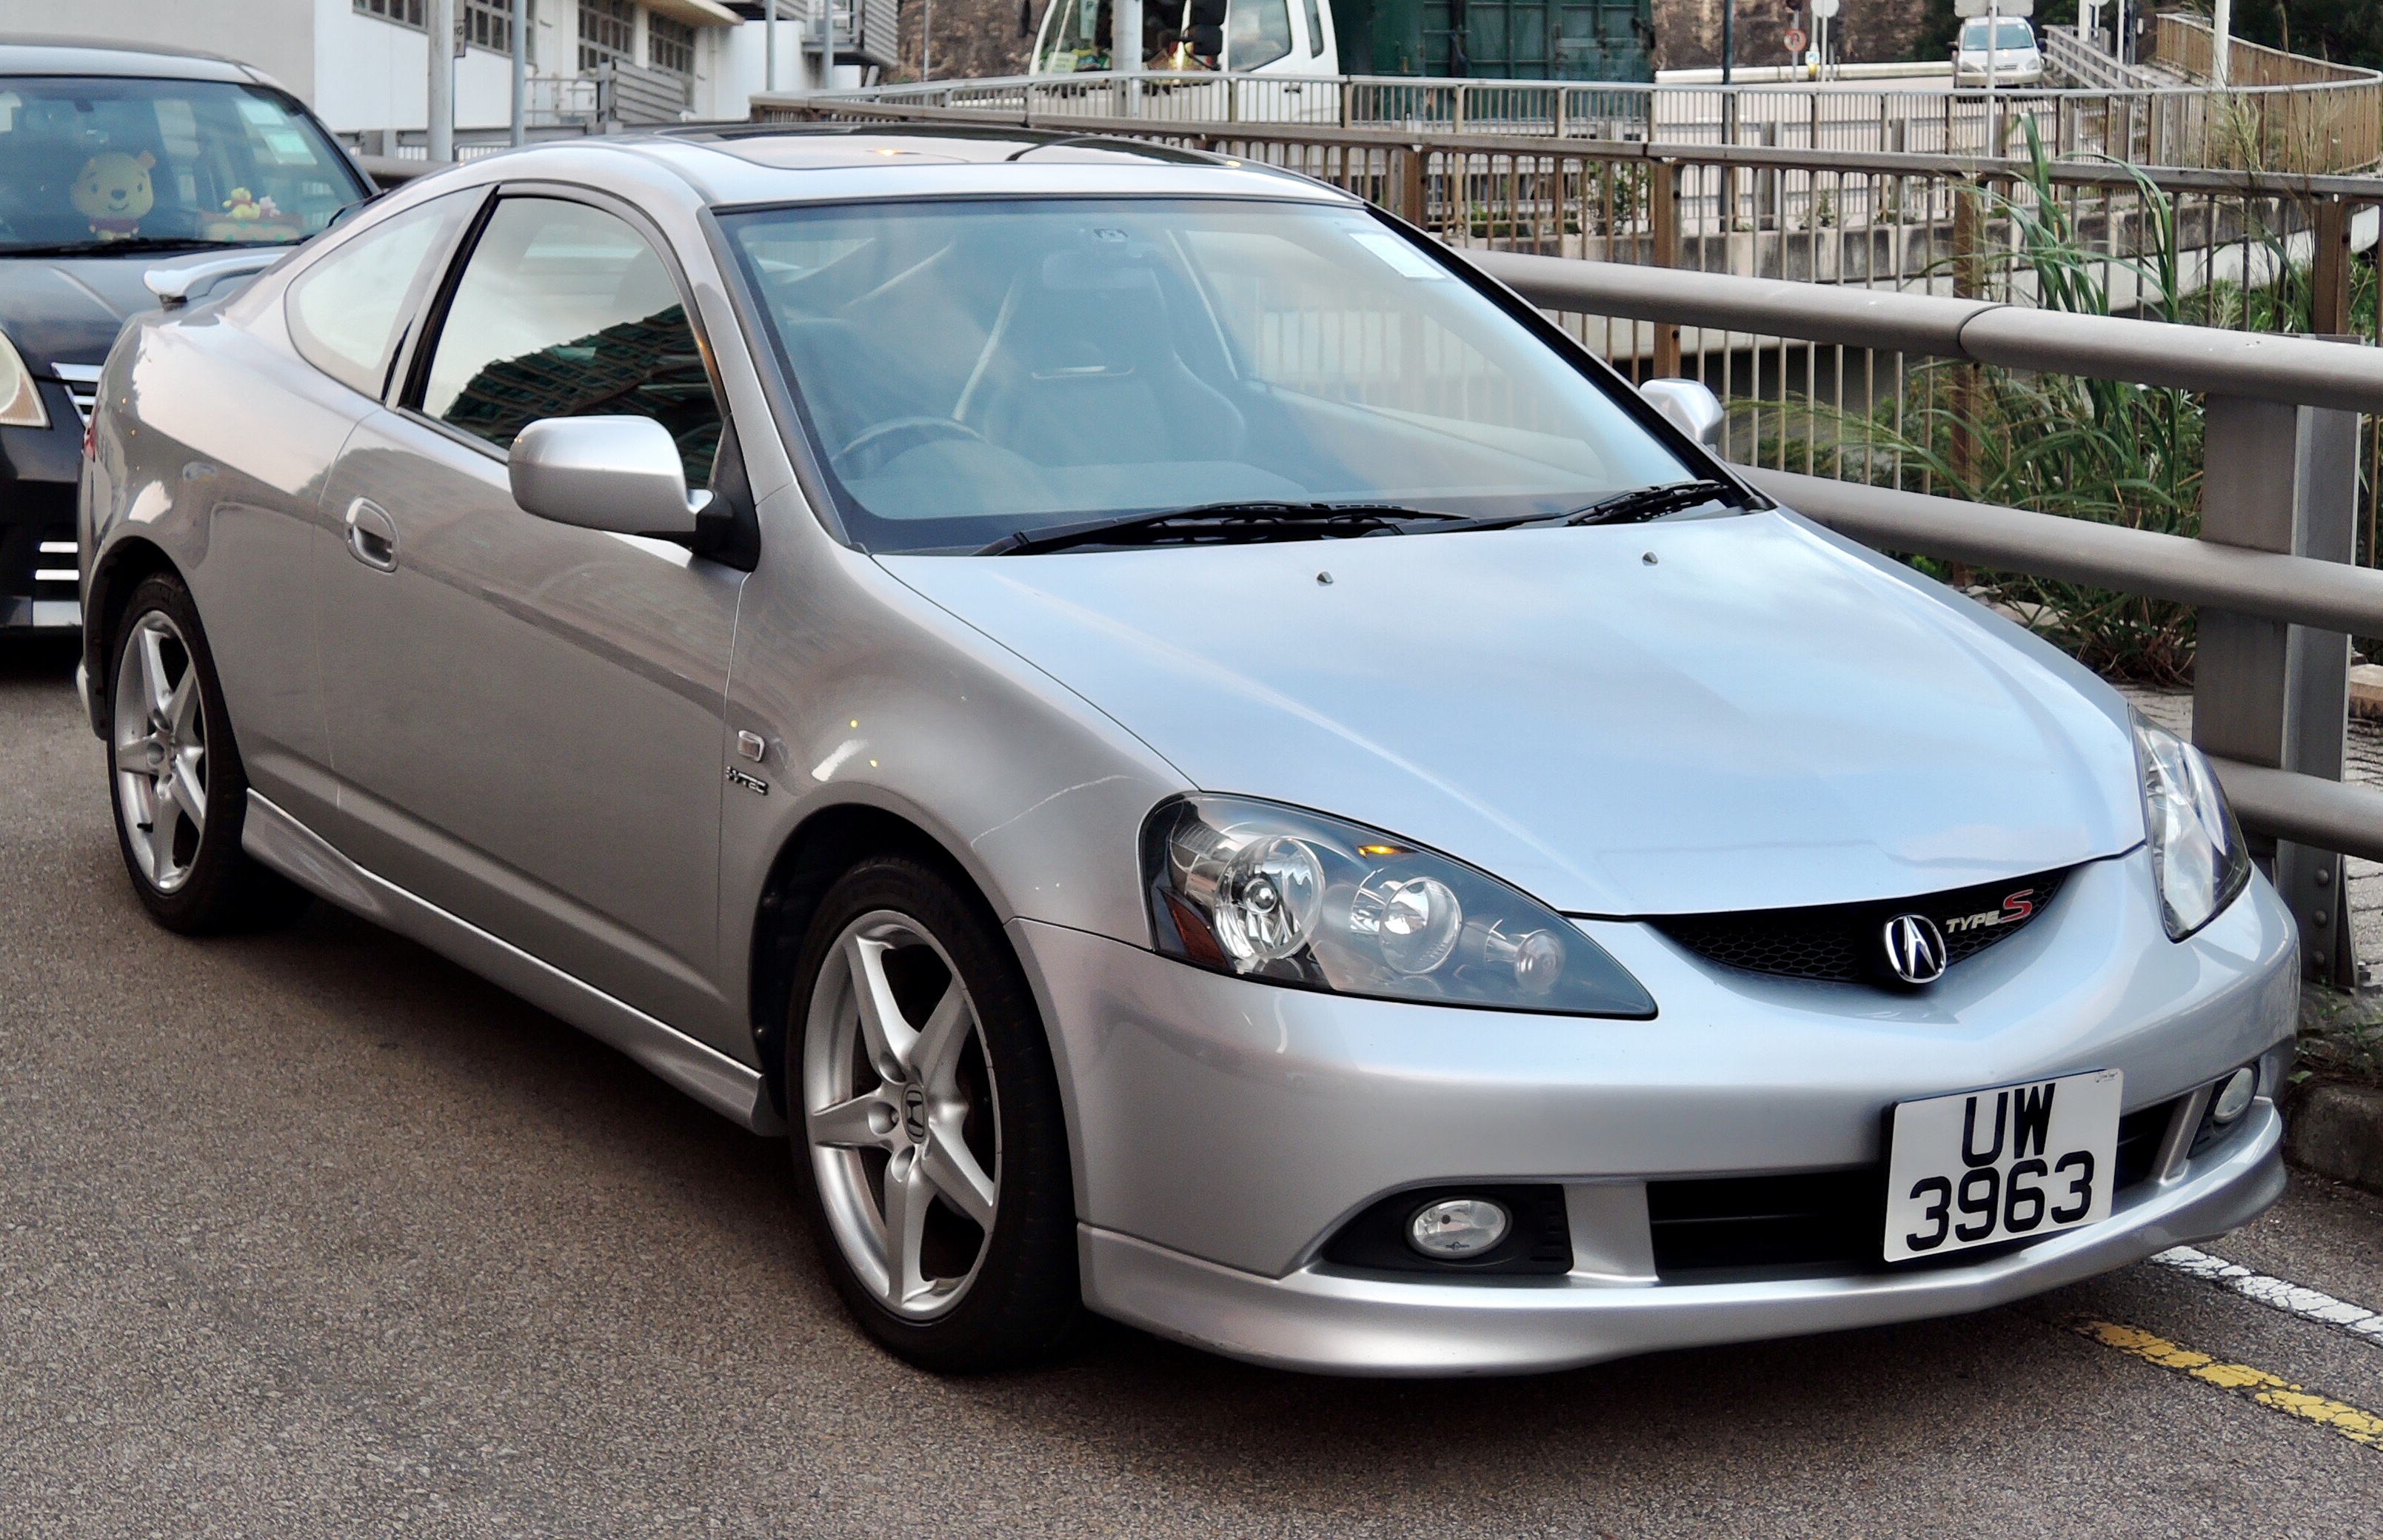 File:2006 Acura RSX Type-S (front).jpg - Wikimedia Commons